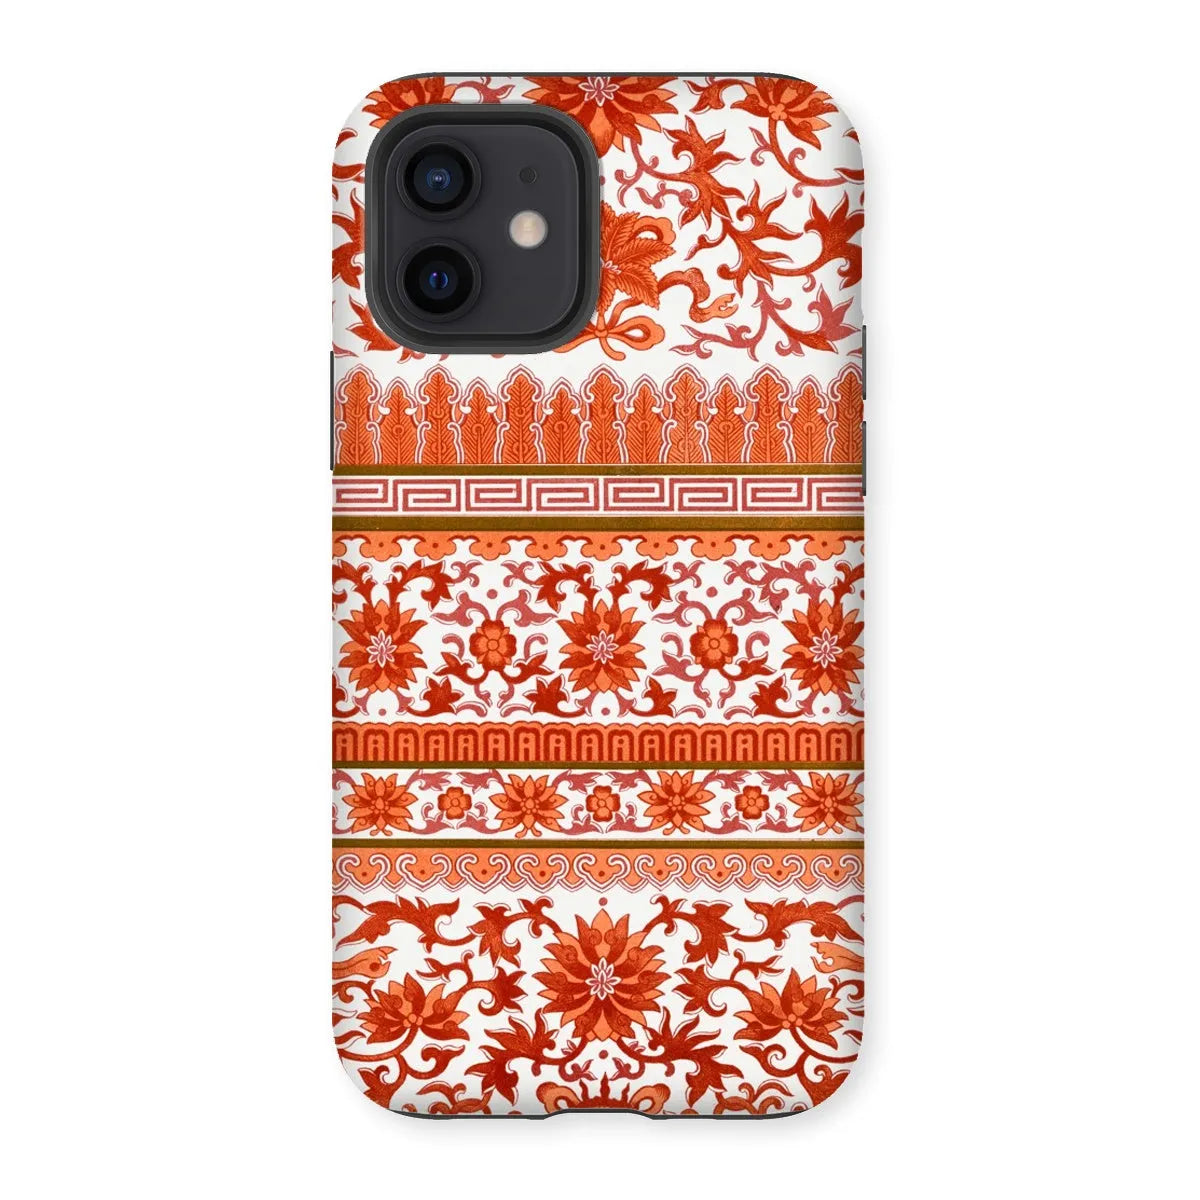 Fiery Chinese Floral Aesthetic Art Phone Case - Owen Jones - Iphone 12 / Matte - Mobile Phone Cases - Aesthetic Art